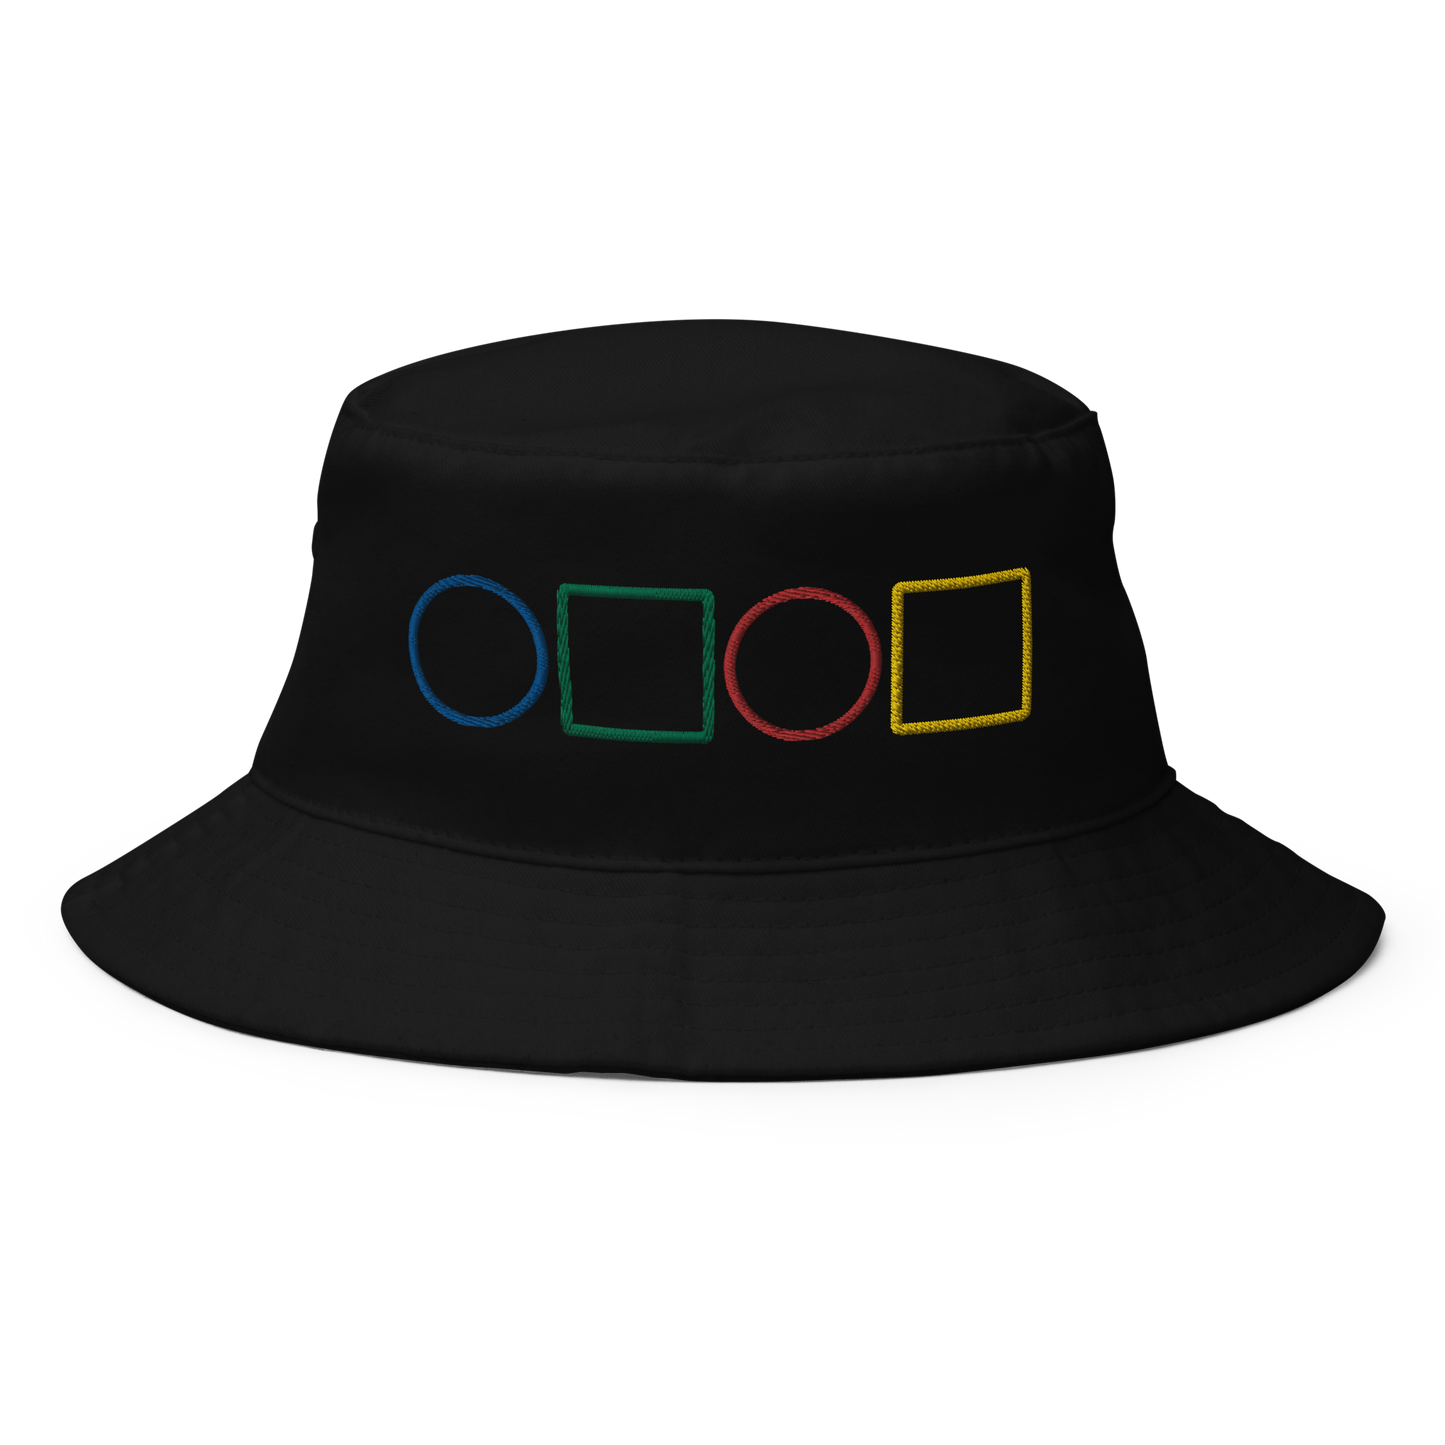 Sci-Fi Soldier Bucket Hat | Flat Embroidery | Inspired Phan Art